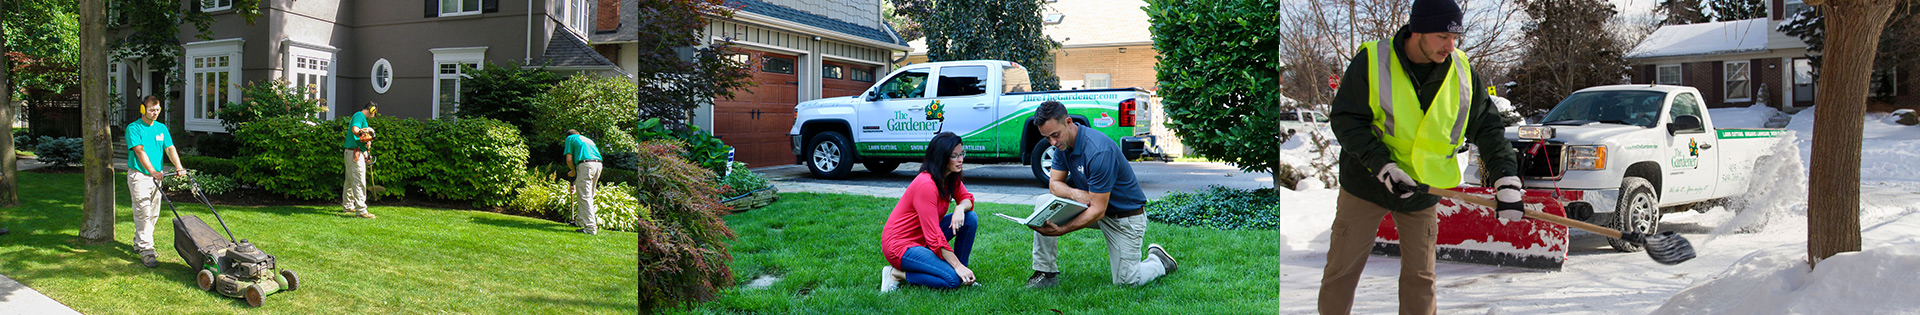 professional landscaping & residential property maintenance services